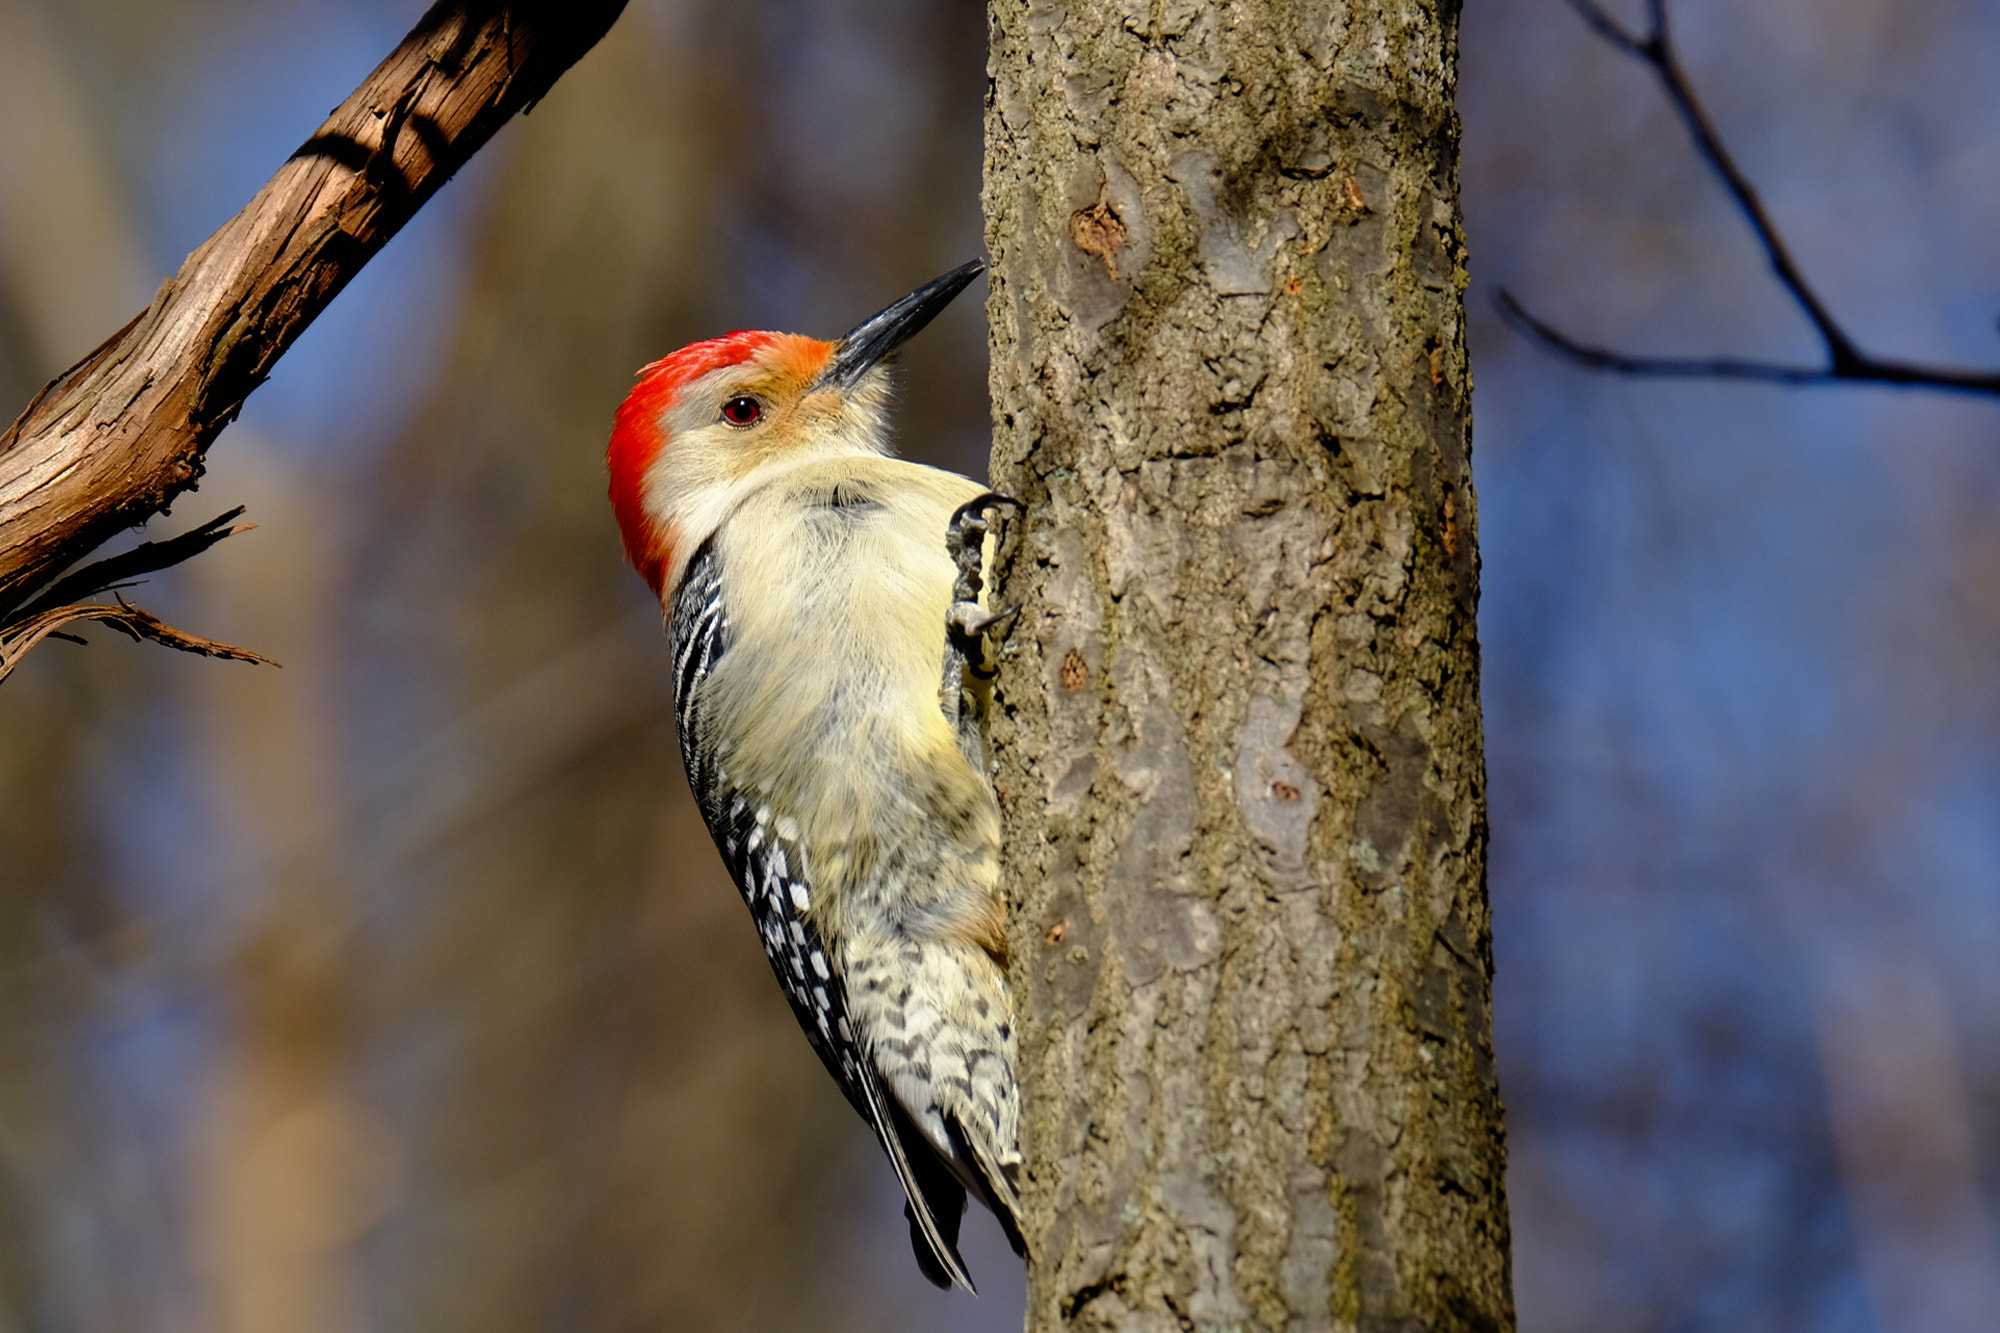 XF100-400mmF4.5-5.6 R LM OIS WR + 1.4x sample photo. Red-bellied woodpecker photography